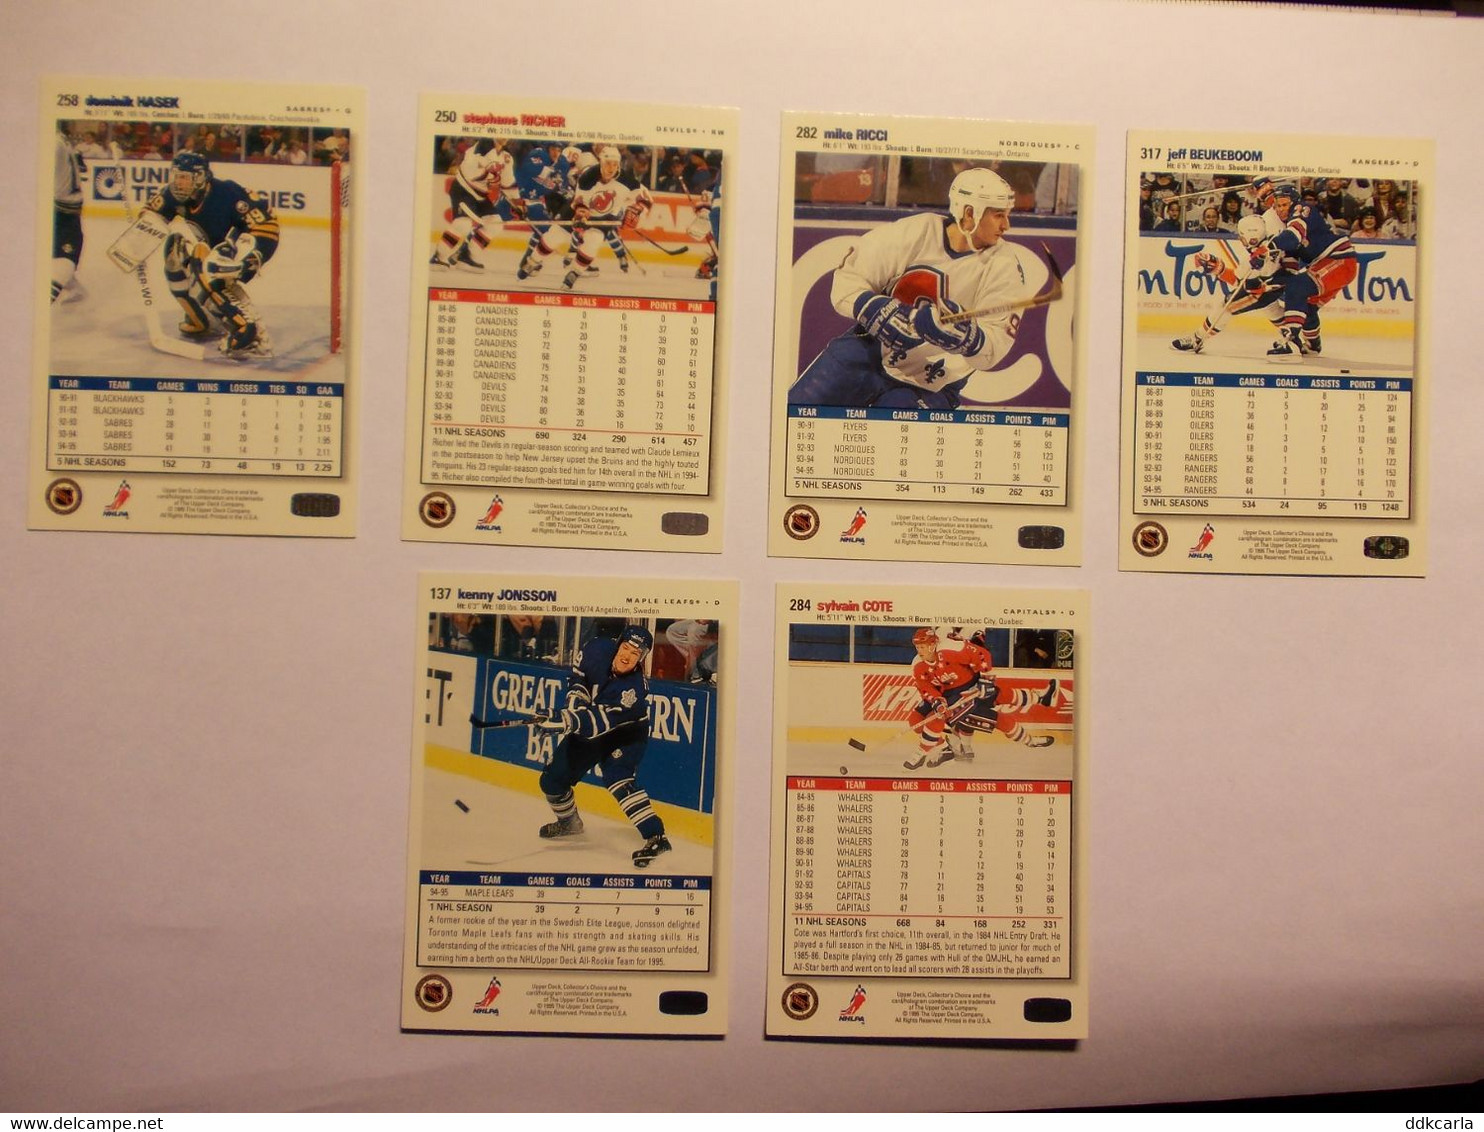 6 X Collector's Choice 137 / 250 / 258 / 282 / 284 / 317- Trading Cards NHLPA - 1995 - Hologram Cards - 1990-1999